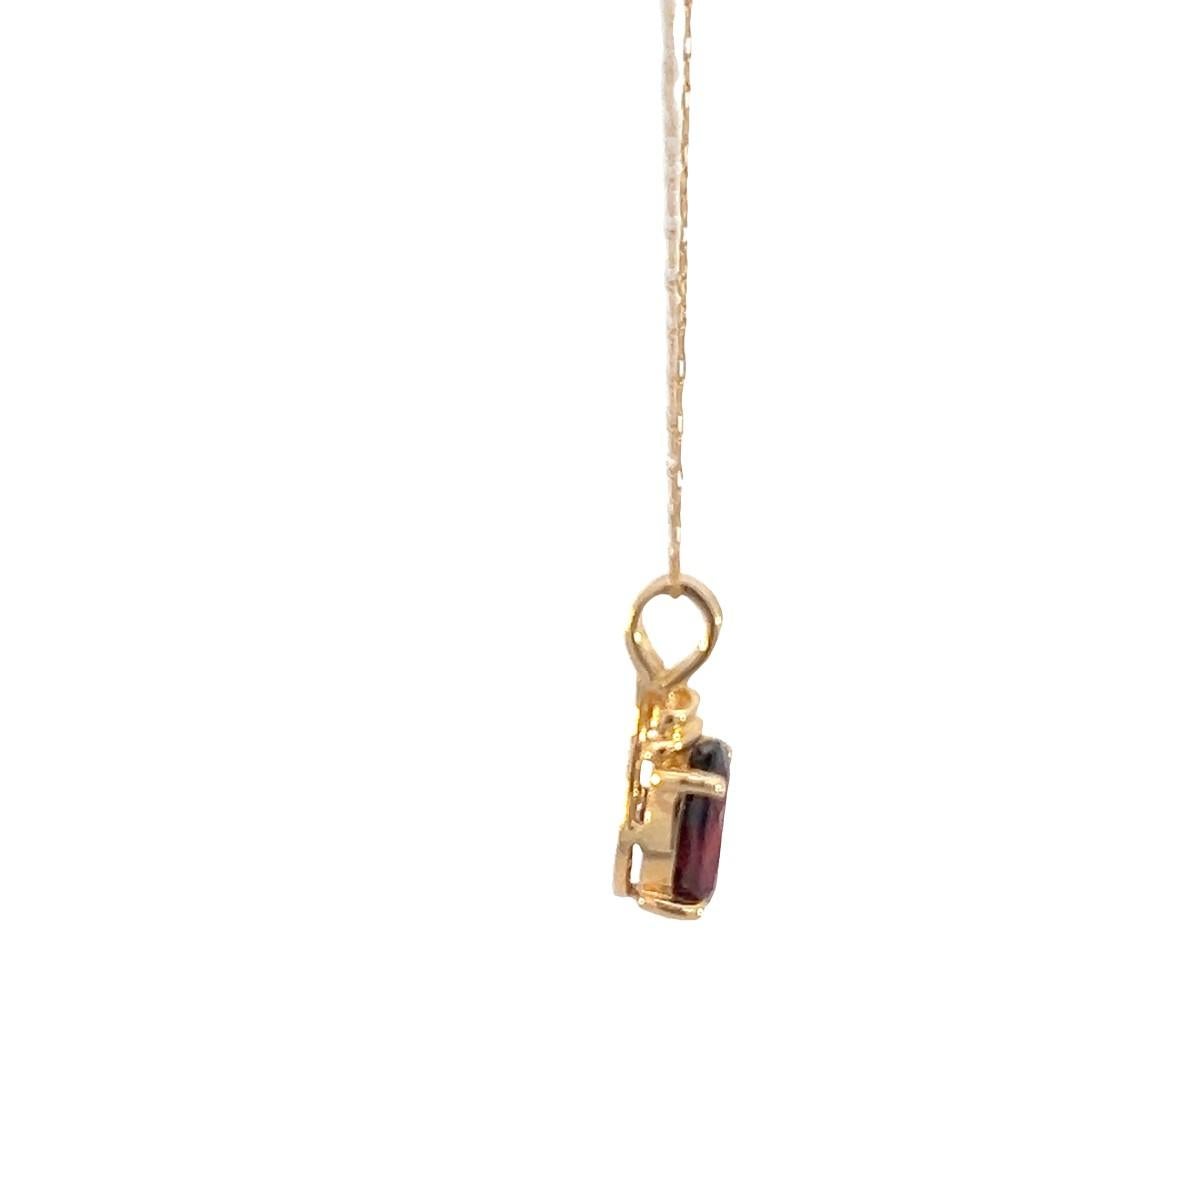 The 20-inch necklace you've described, made of 14K yellow gold and featuring an approximately 2-carat synthetic garnet stone, sounds like a beautiful and eye-catching piece of jewelry. Let's break down some aspects:

Metal Quality: 14K yellow gold